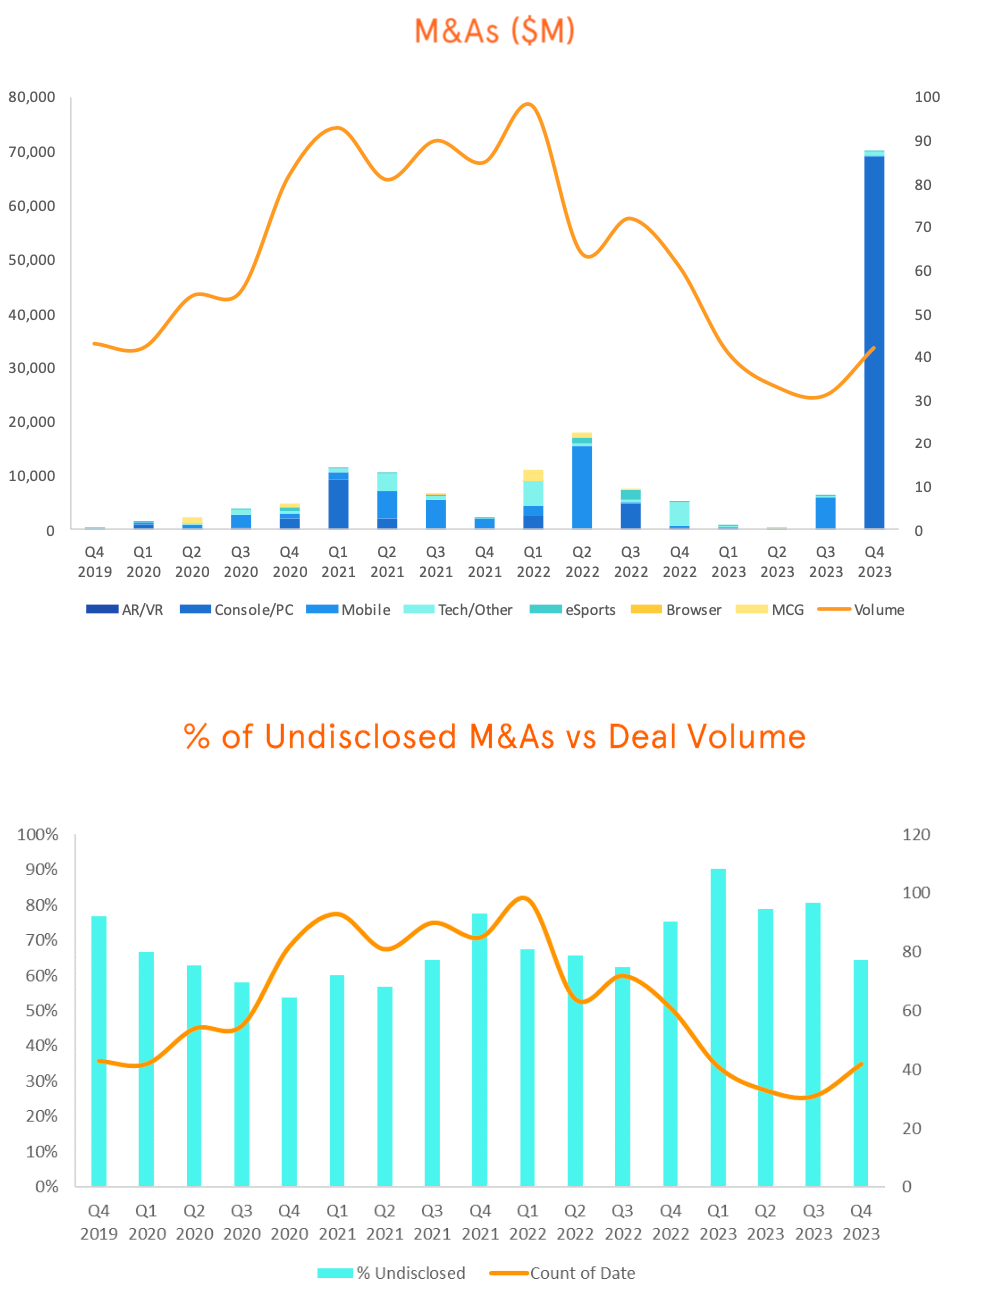 Q4 2023 Results - M&A